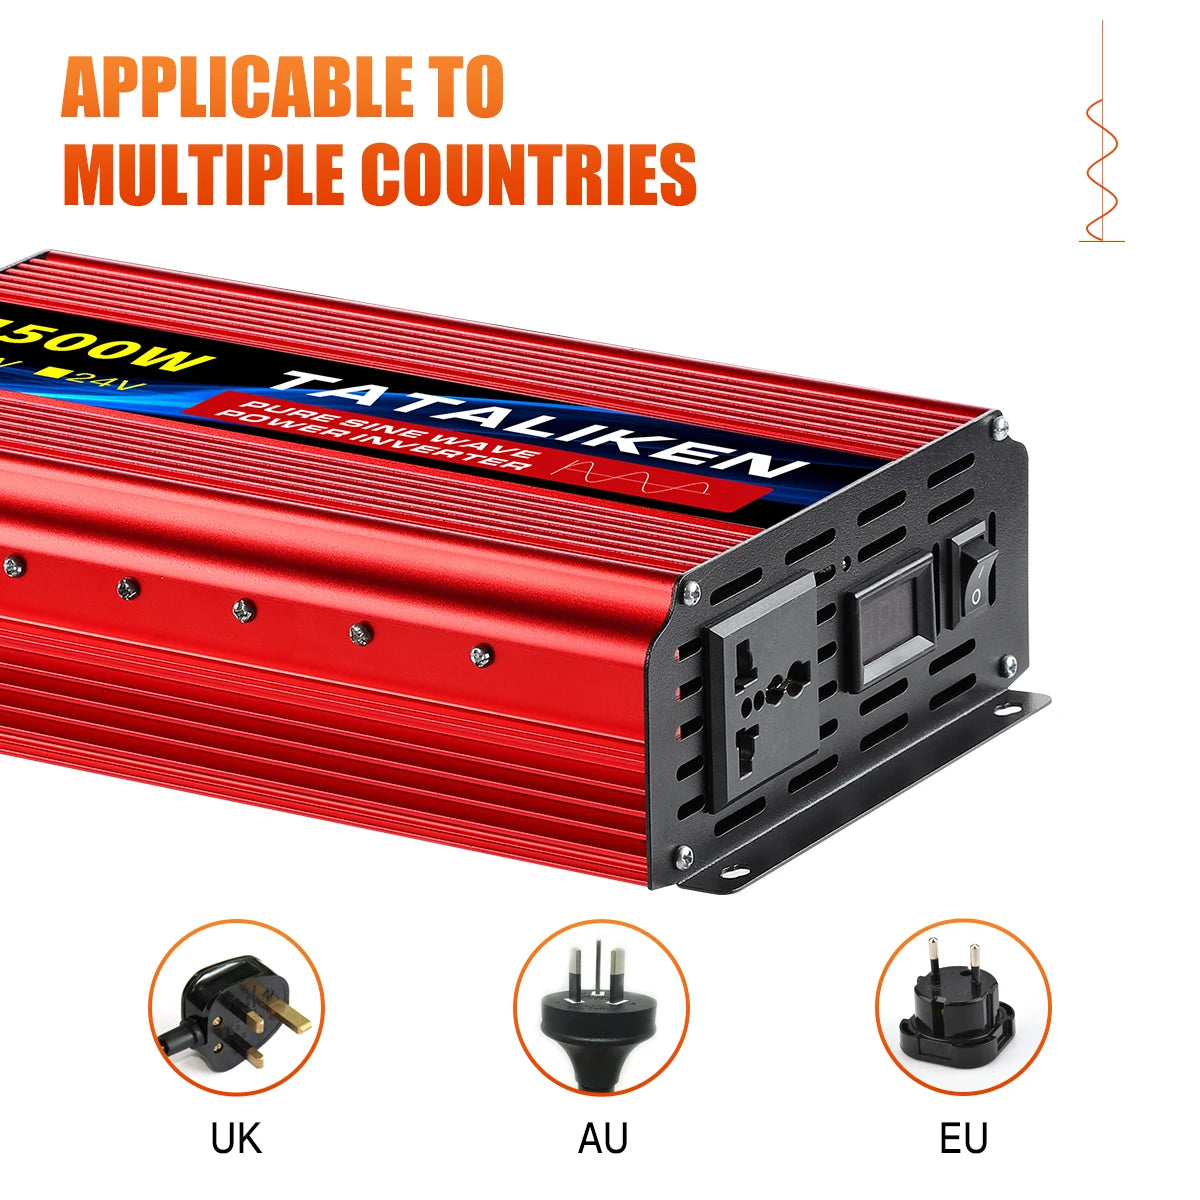 Inverter, Universal power converter suitable for multiple countries, including UK, Australia, EU, and others.